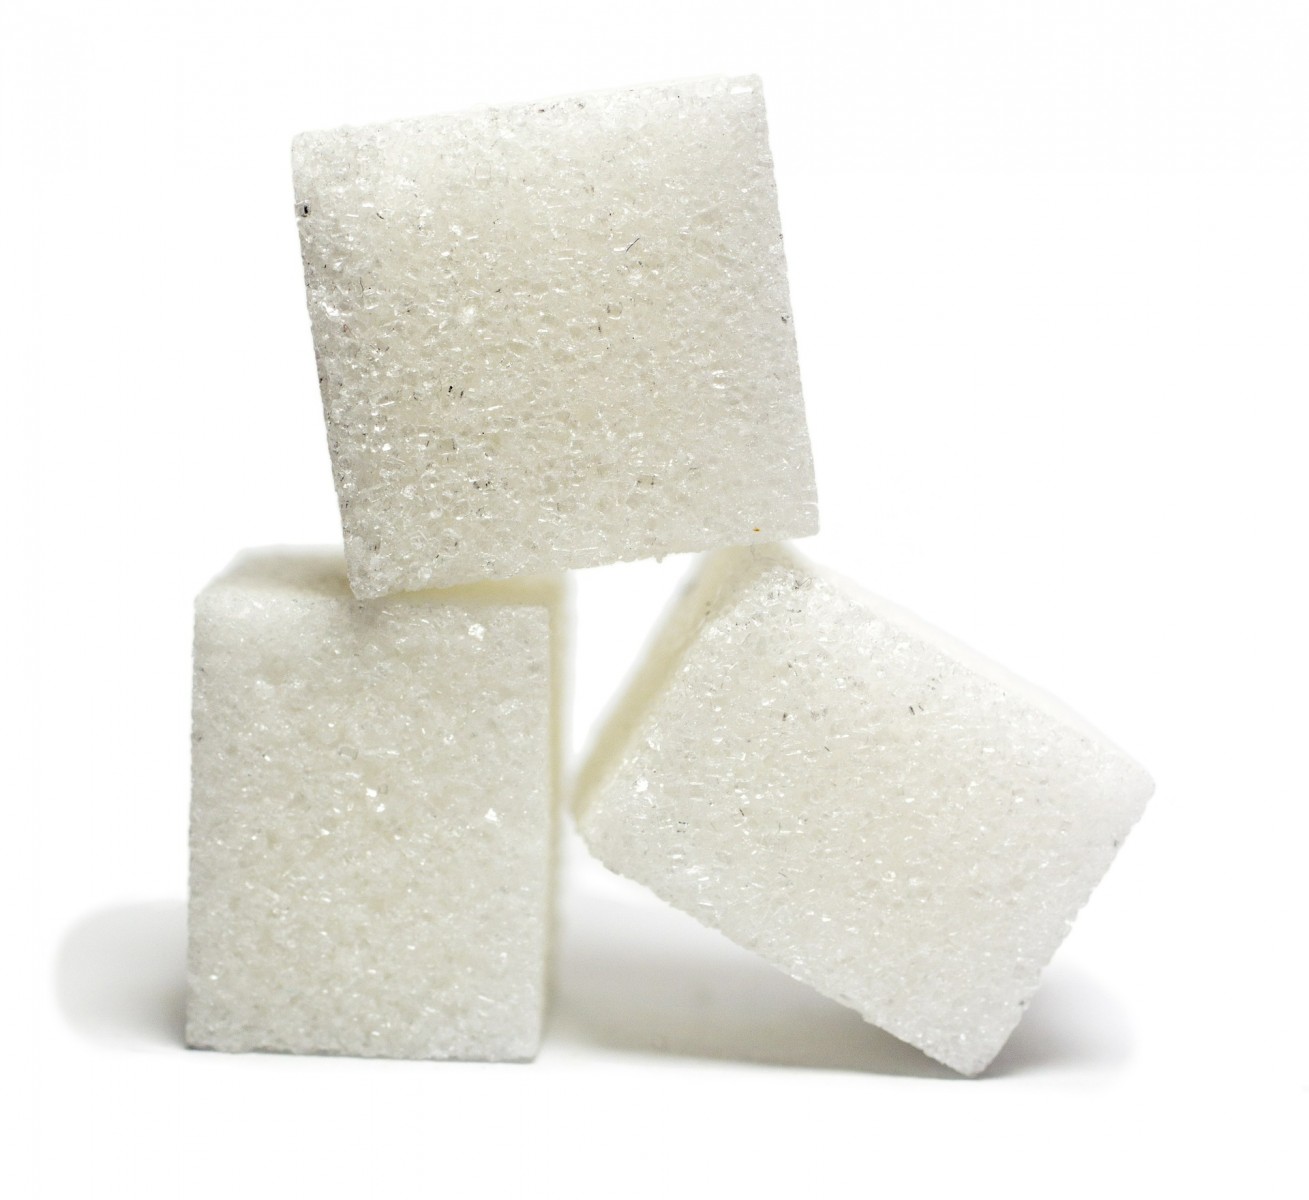 Sugar could be sweet solution to respiratory disease